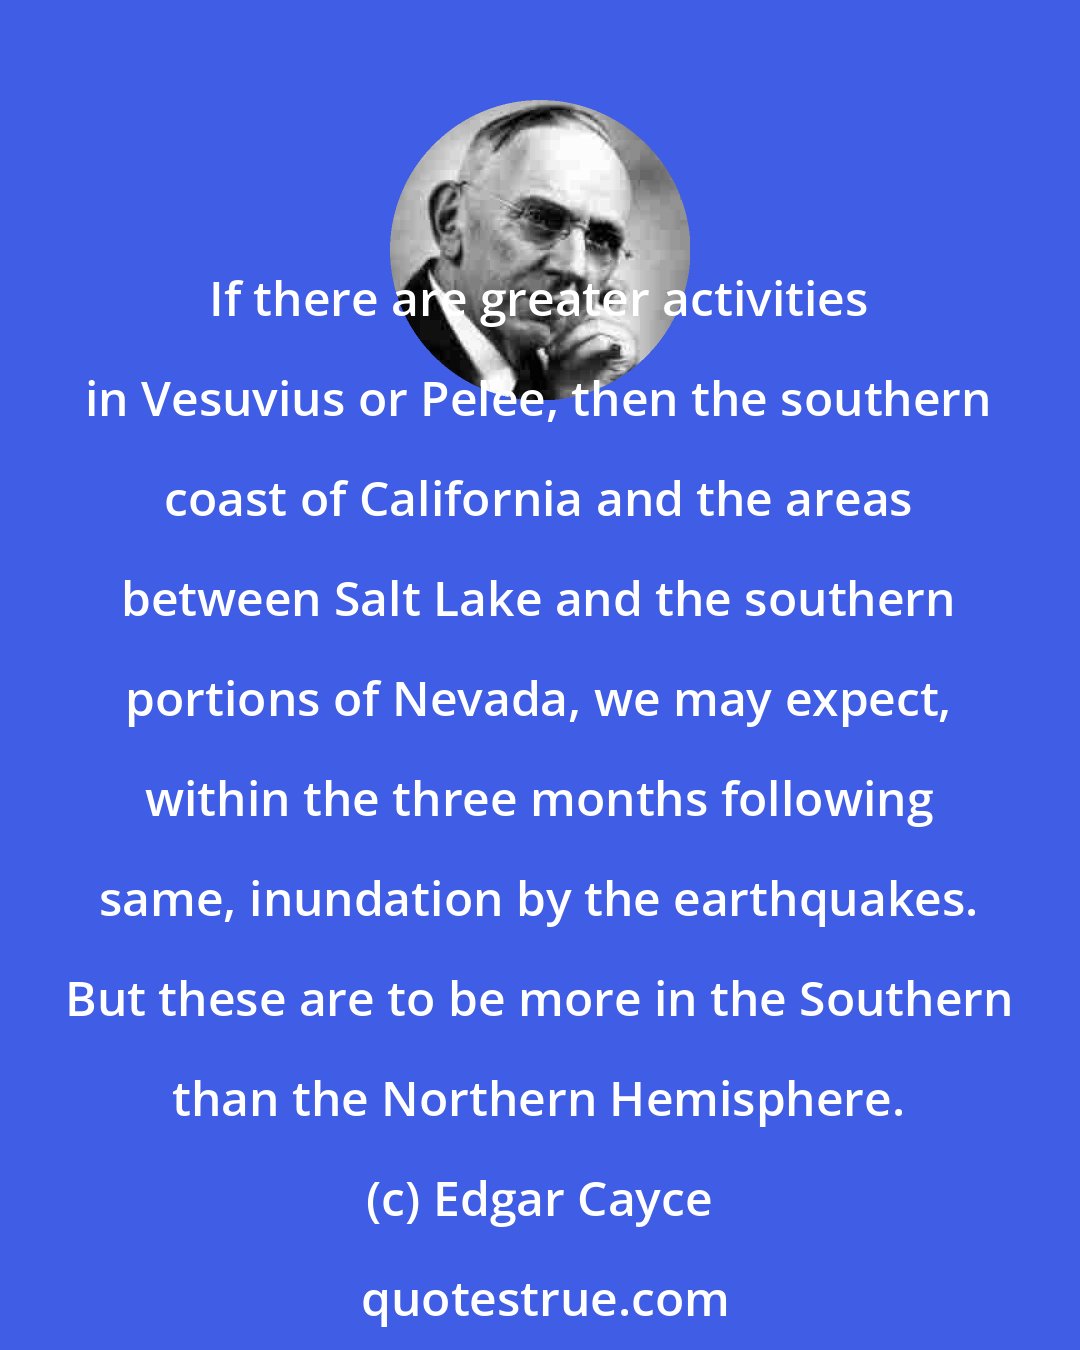 Edgar Cayce: If there are greater activities in Vesuvius or Pelee, then the southern coast of California and the areas between Salt Lake and the southern portions of Nevada, we may expect, within the three months following same, inundation by the earthquakes. But these are to be more in the Southern than the Northern Hemisphere.